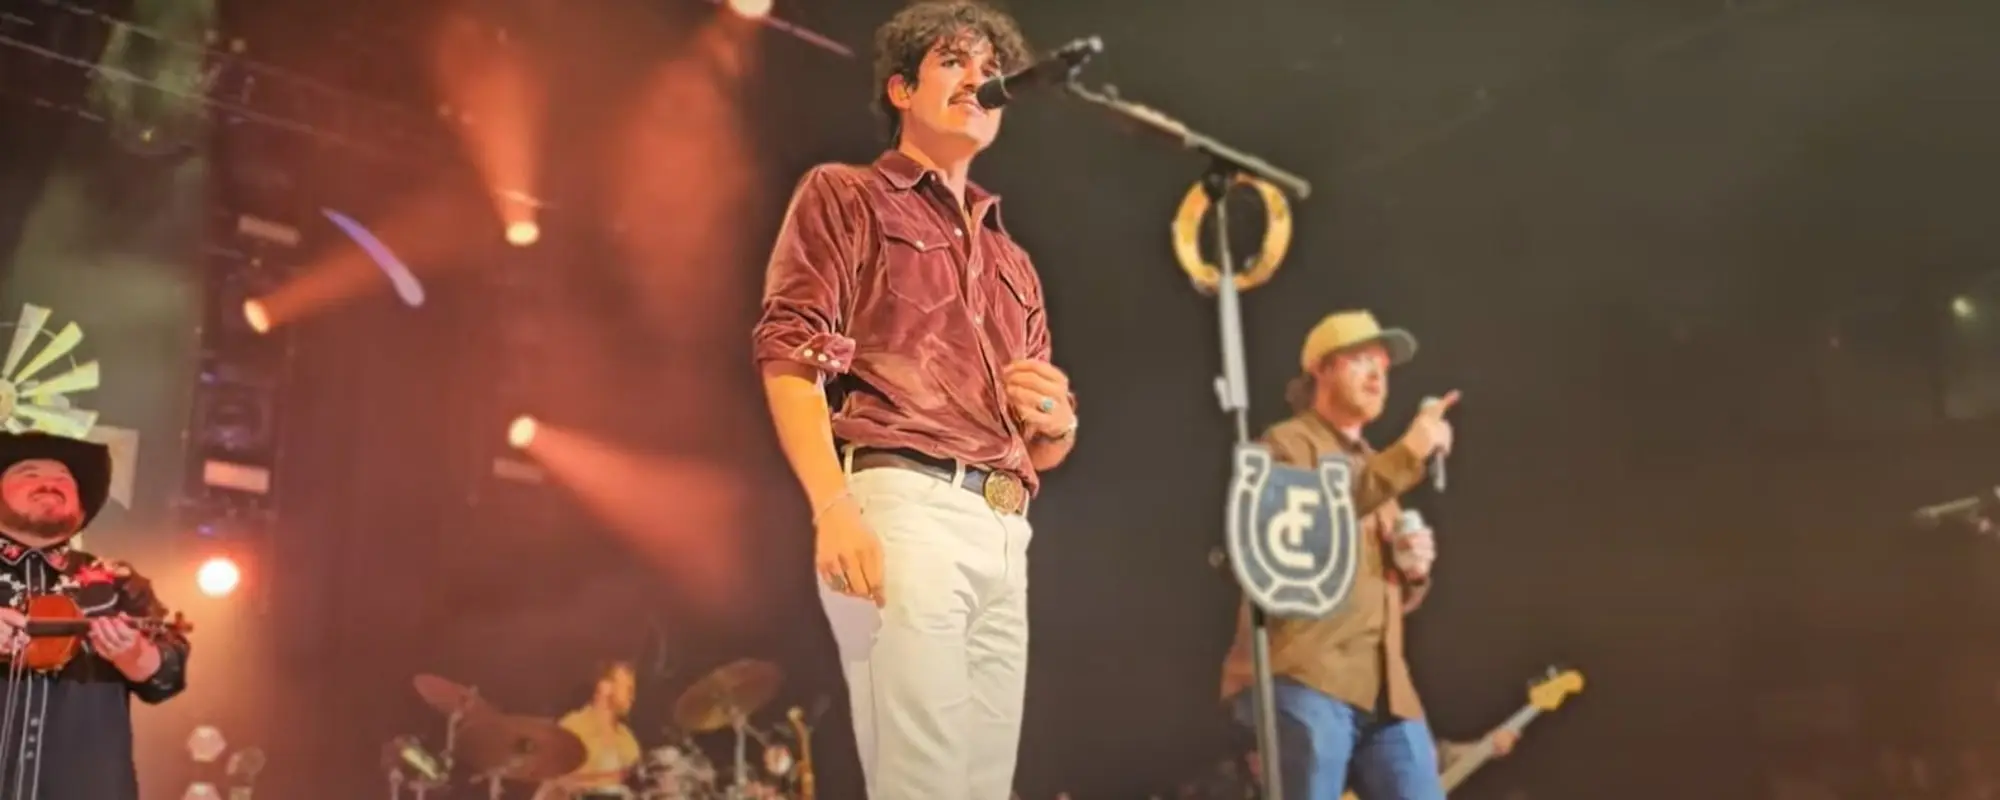 Watch Flatland Cavalry Pay Tribute to Toby Keith During Their First Headlining Show at the Ryman